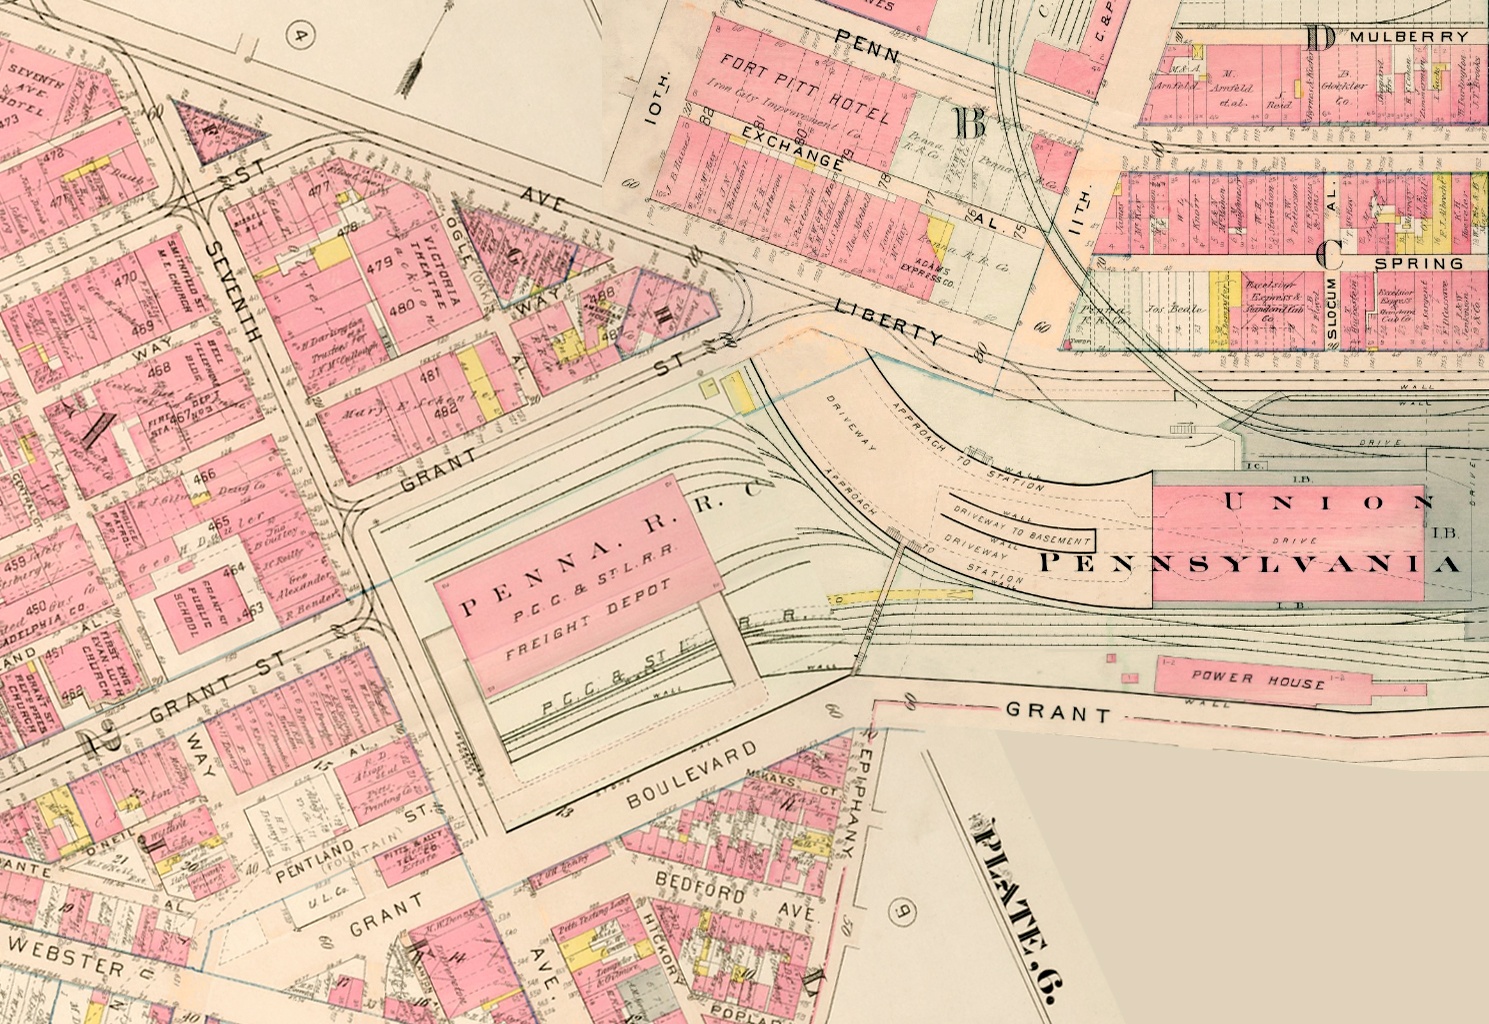 This 1914 map shows how Grant Street (lower left) was rerouted in the 1880s east of Seventh Avenue so that the Pennsylvania Railroad freight depot could be built adjacent to the passenger station.